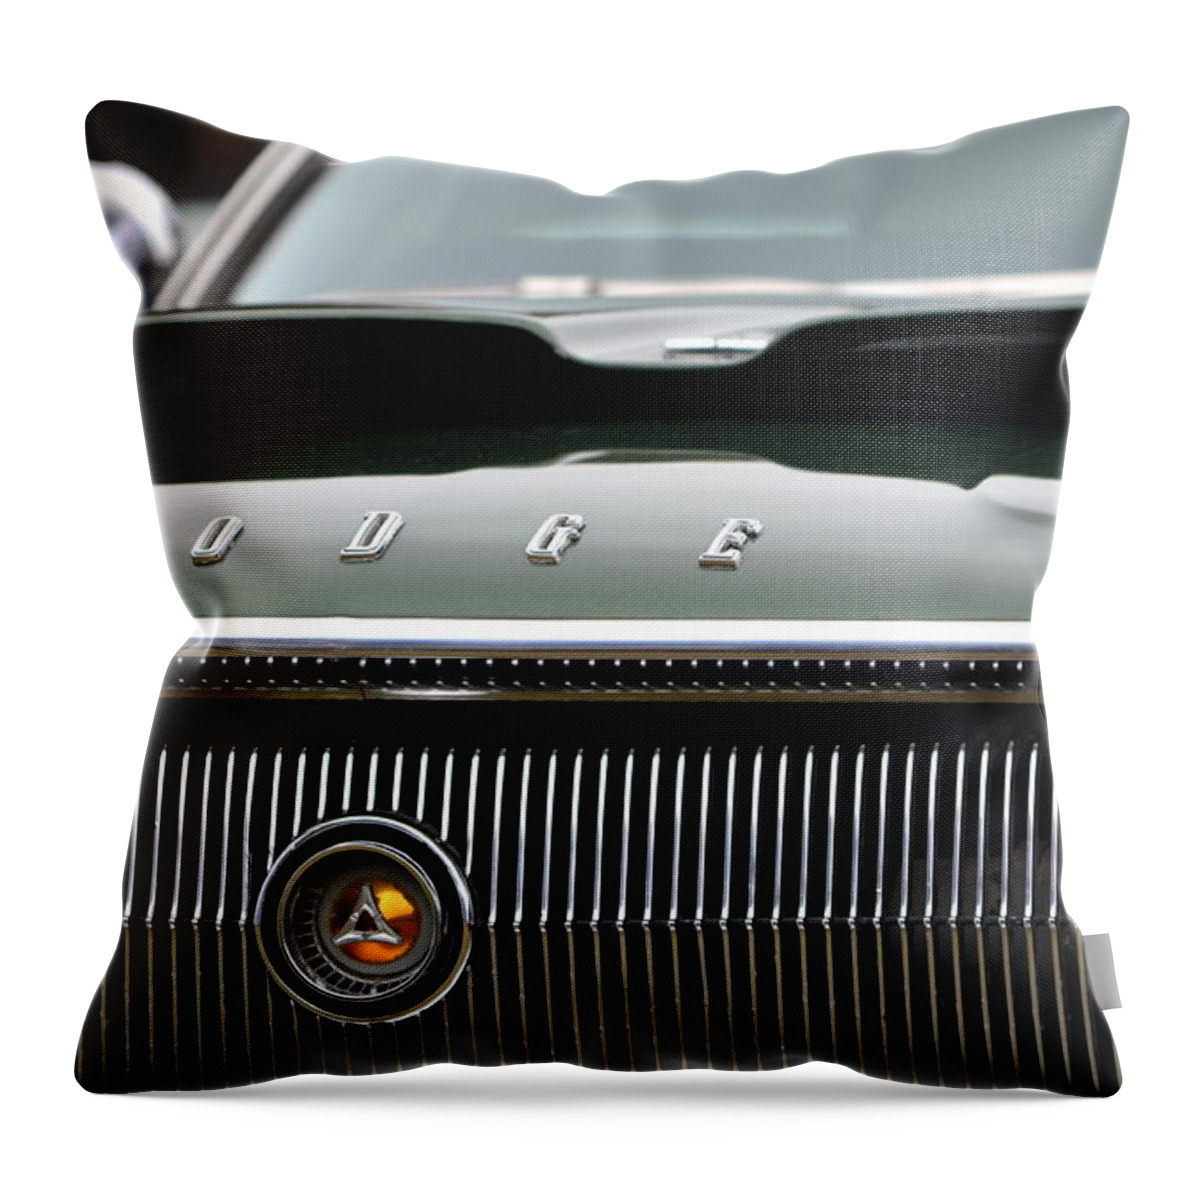  Throw Pillow featuring the photograph Dodge Charger Hood by Dean Ferreira